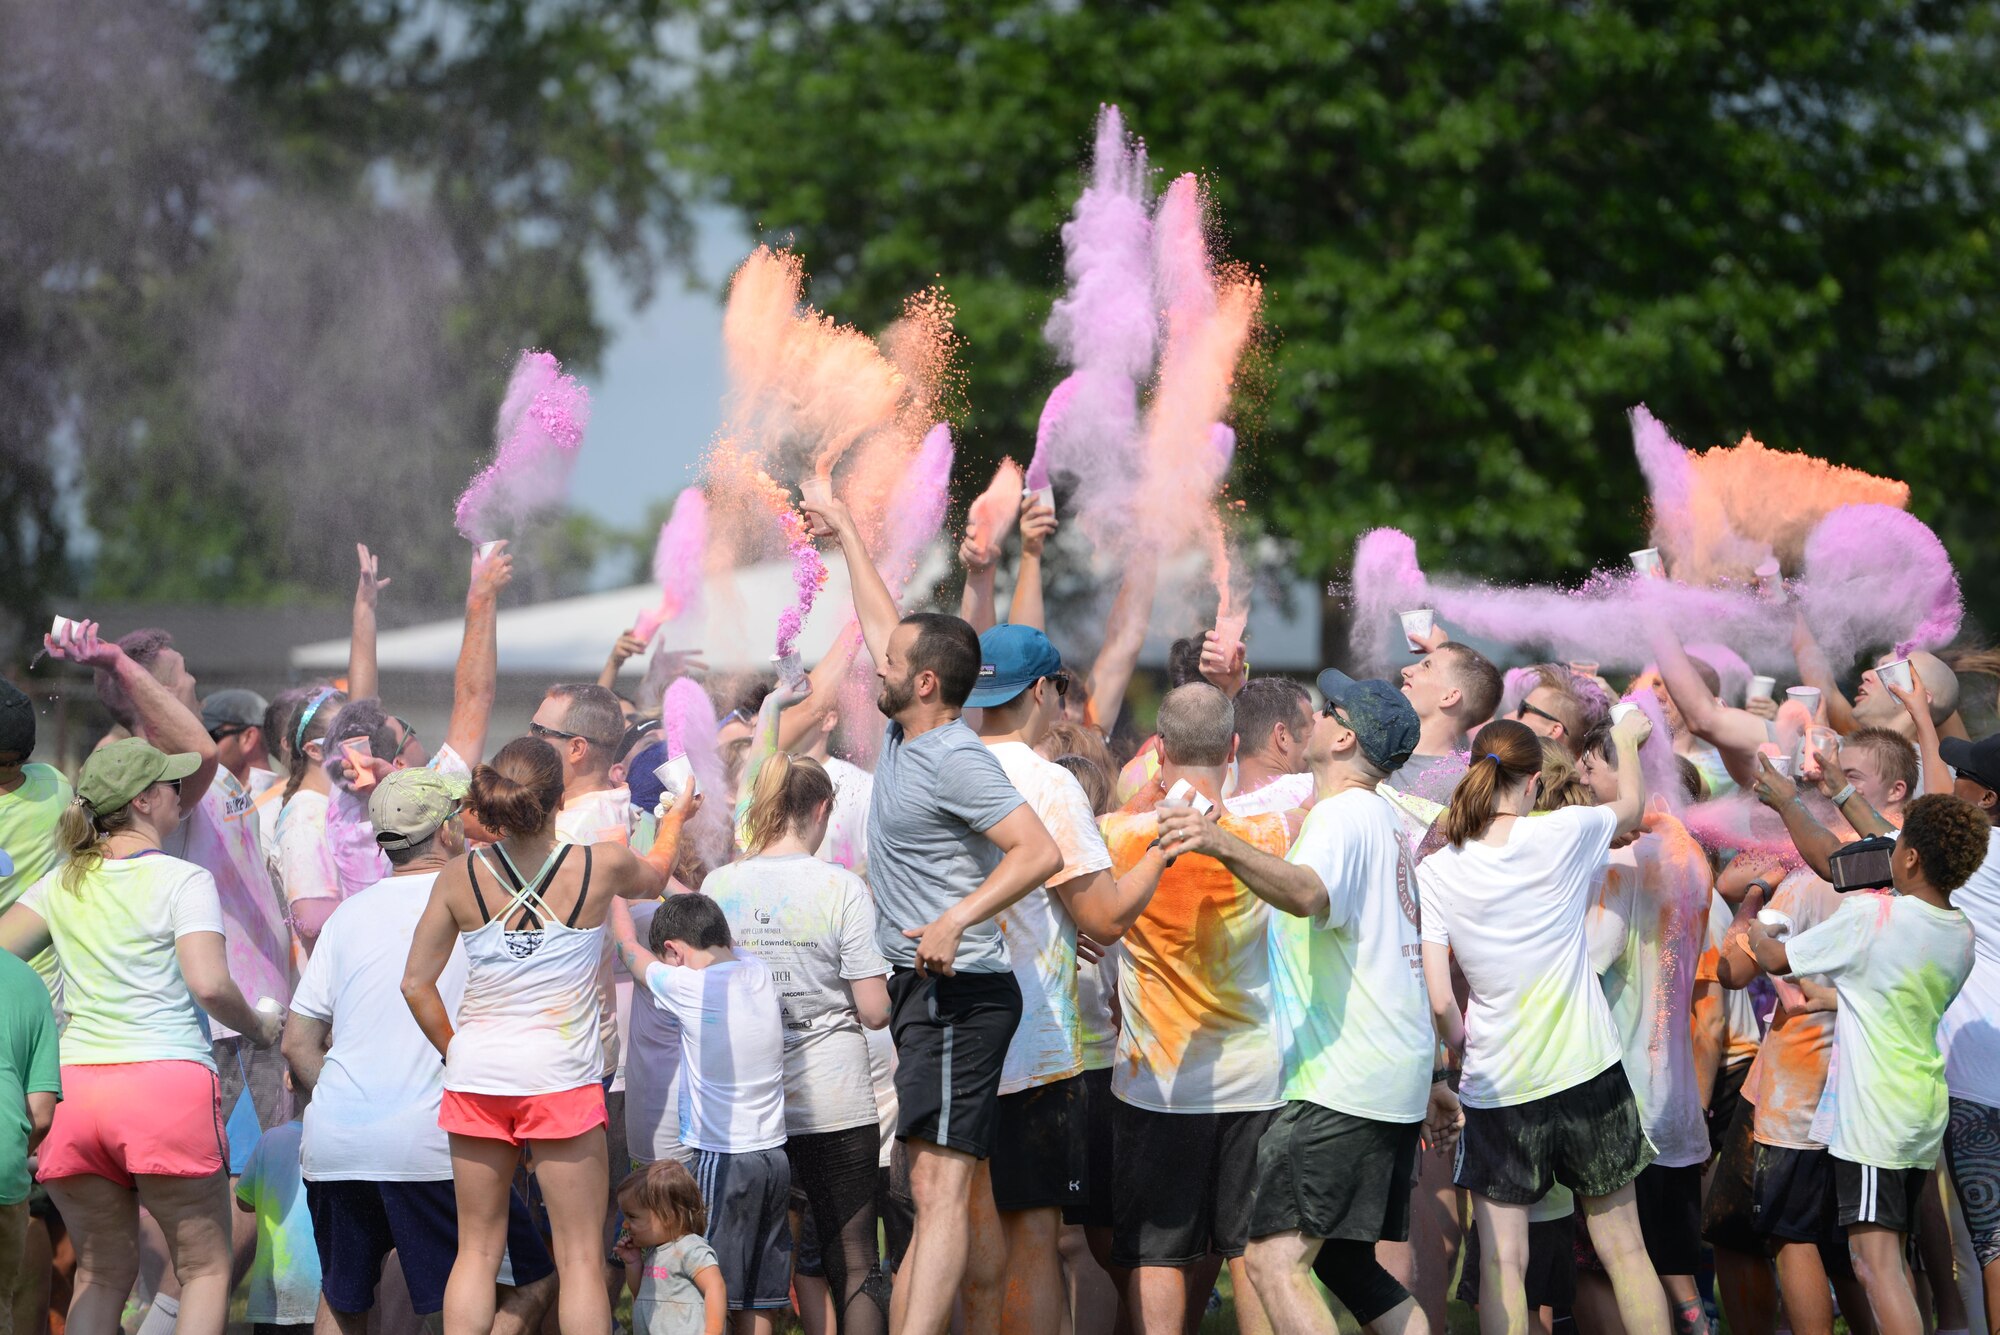 Participants throw a flurry of powder in the air after the 5th annual Color Run July 8, 2017, at Columbus Air Force Base, Mississippi. The Color Run had two routes, a 5-kilometer run and a 2-mile route. The Red Cross provided water, Gatorade and fruits after the race. (U.S. Air Force photo by Airman 1st Class Keith Holcomb)